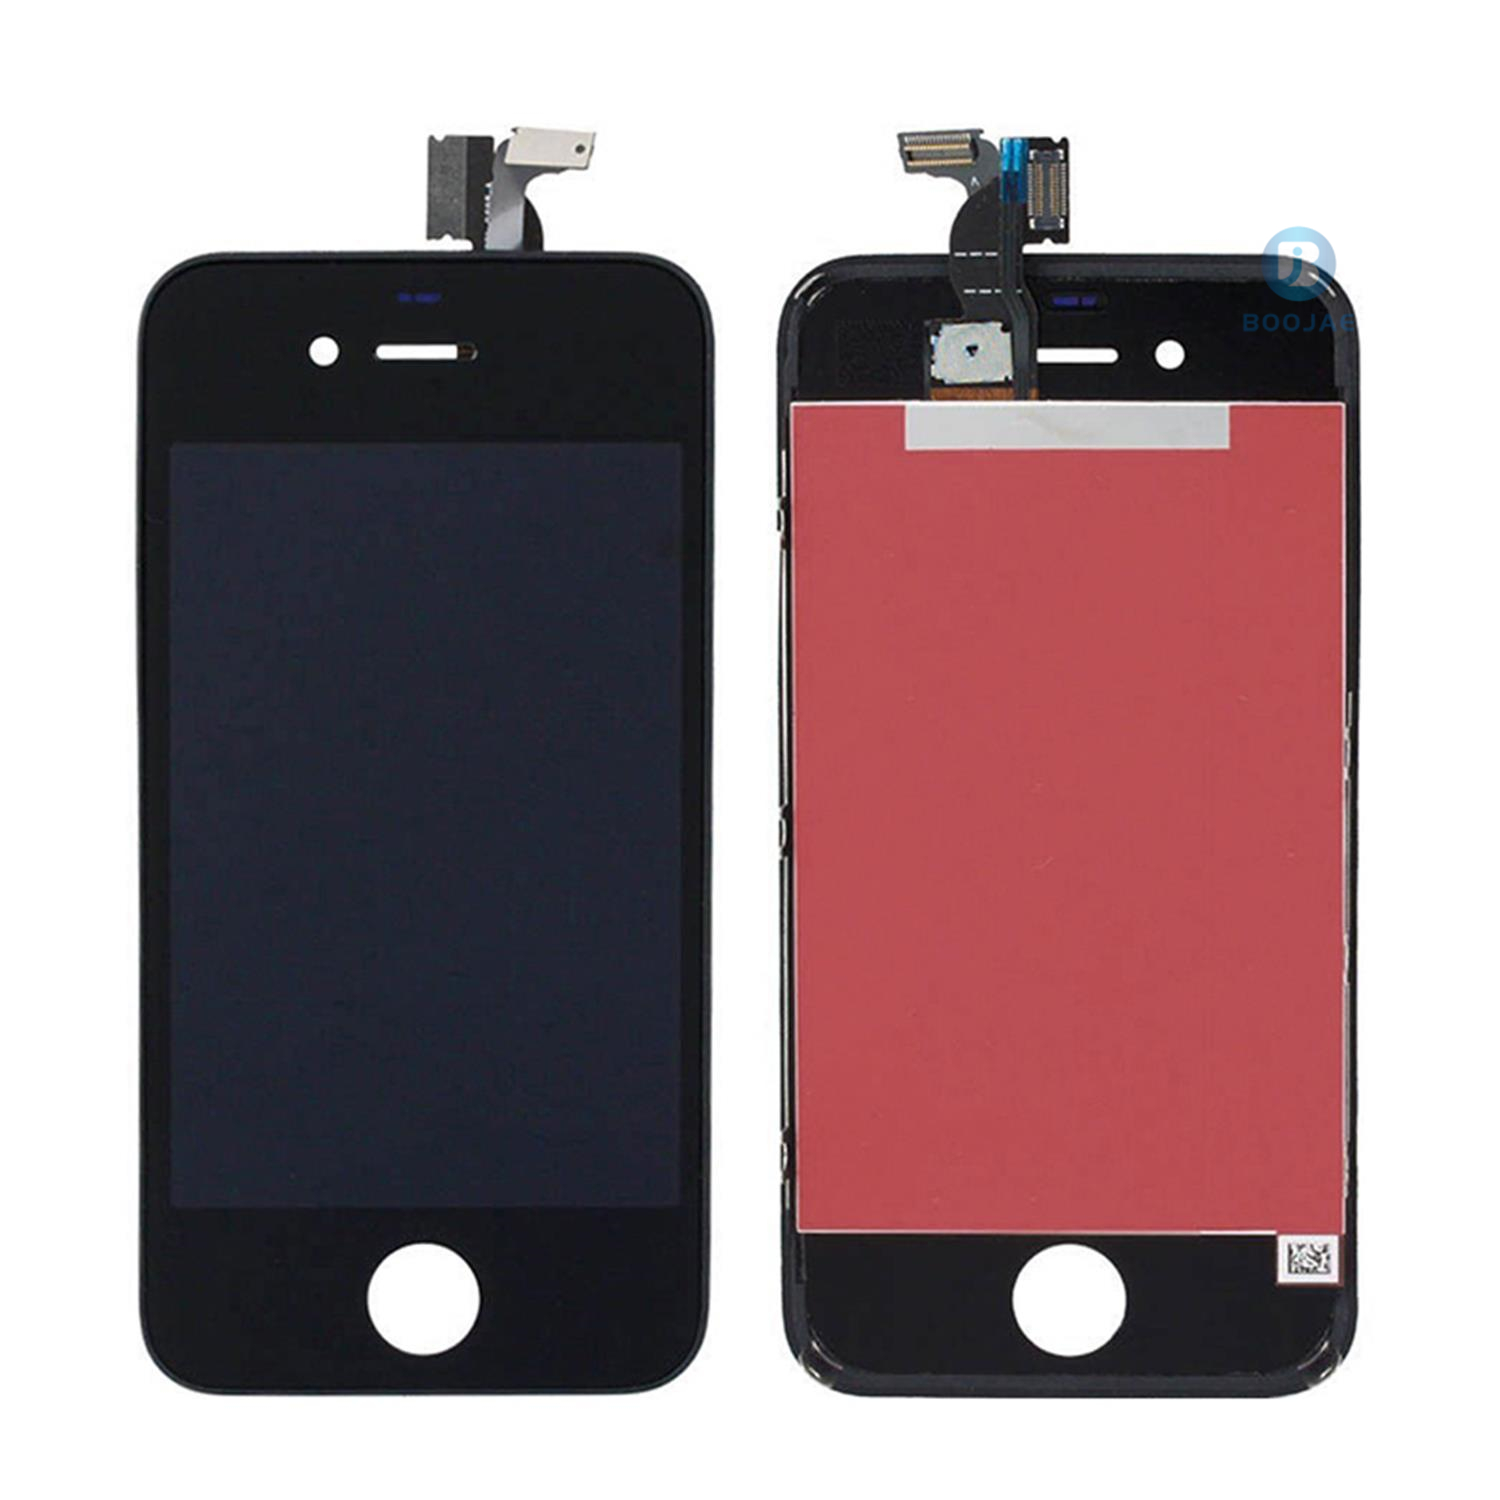 iPhone 4 LCD Screen Display and Touch Panel Digitizer iPhone LCD Wholesale